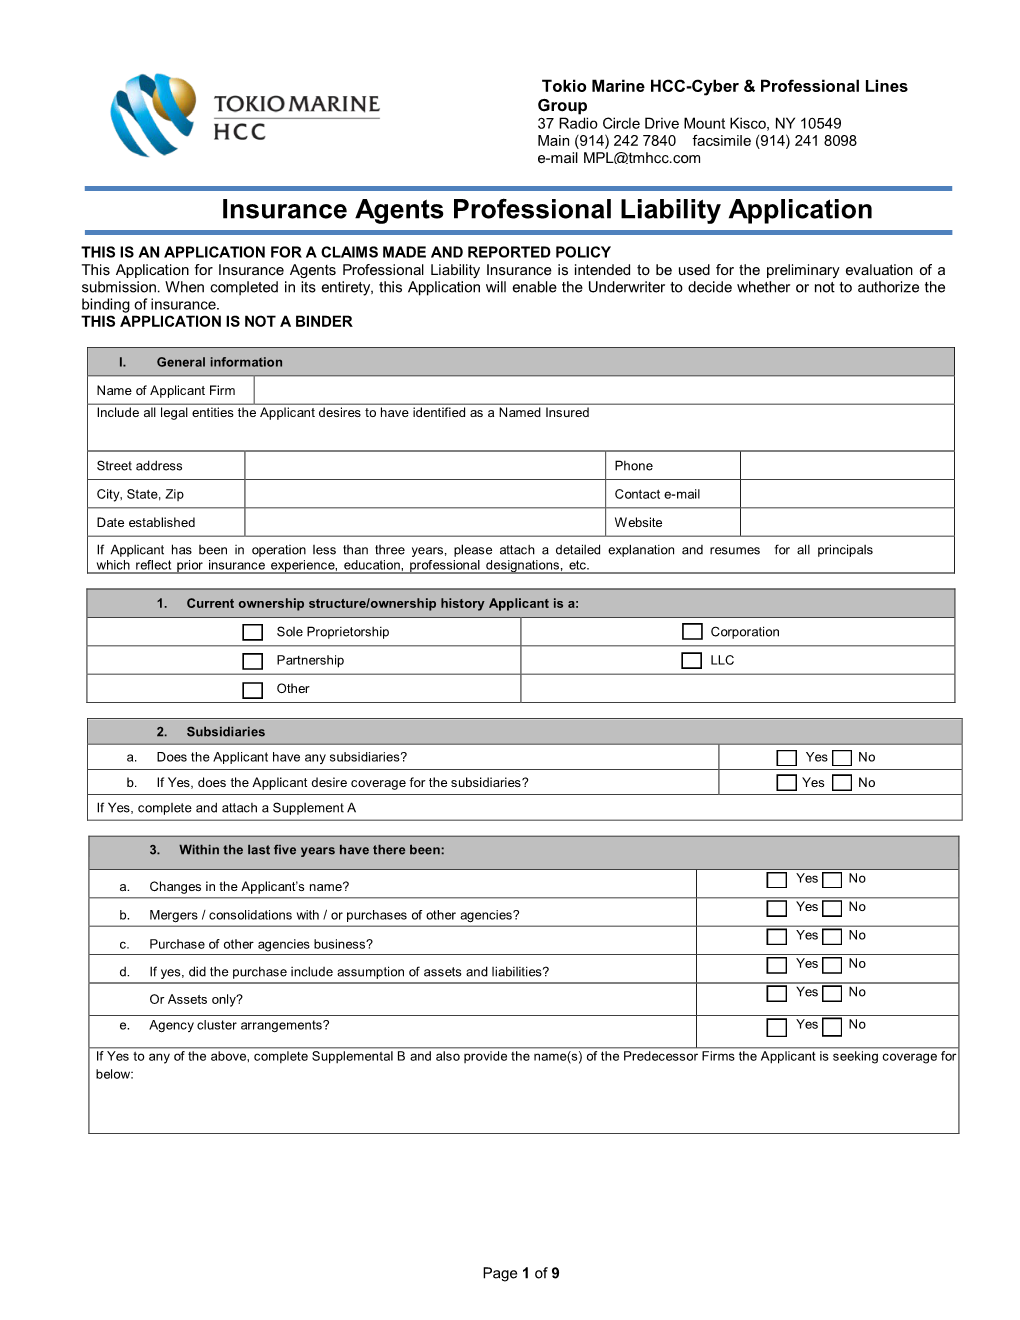 Insurance Agents Professional Liability Application